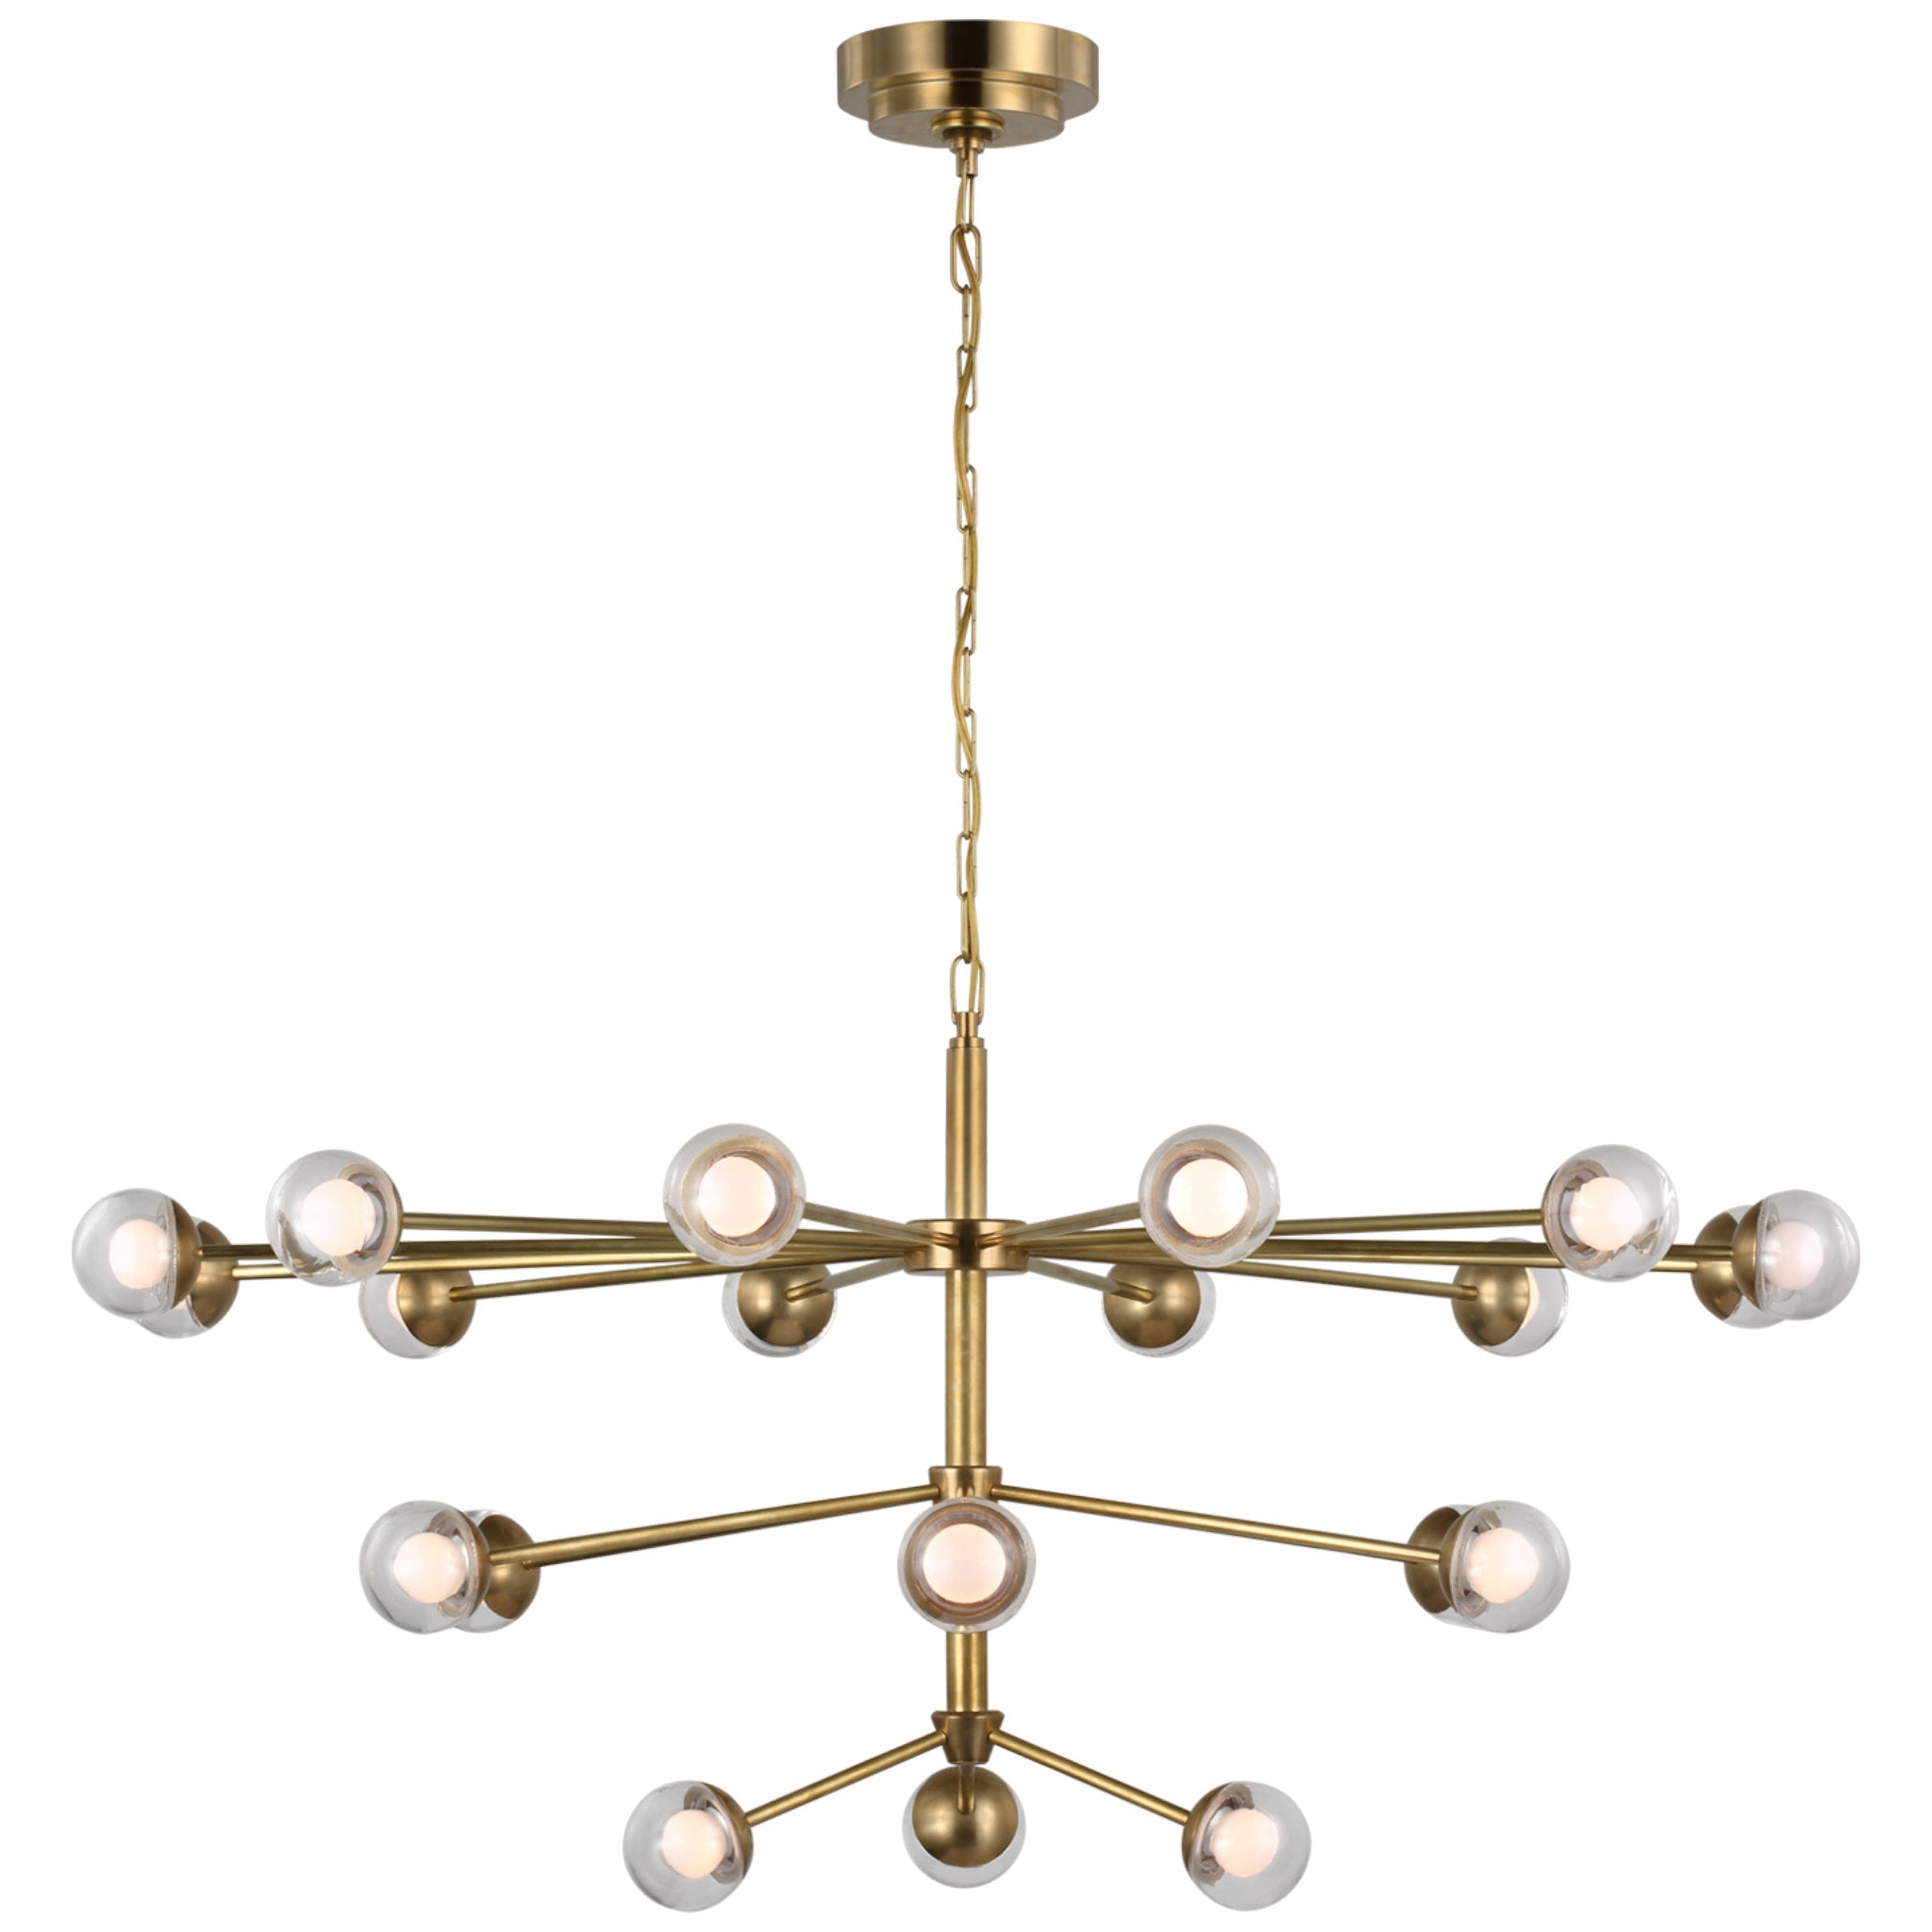 kate spade new york Alloway Large Chandelier in Soft Brass with Clear Glass